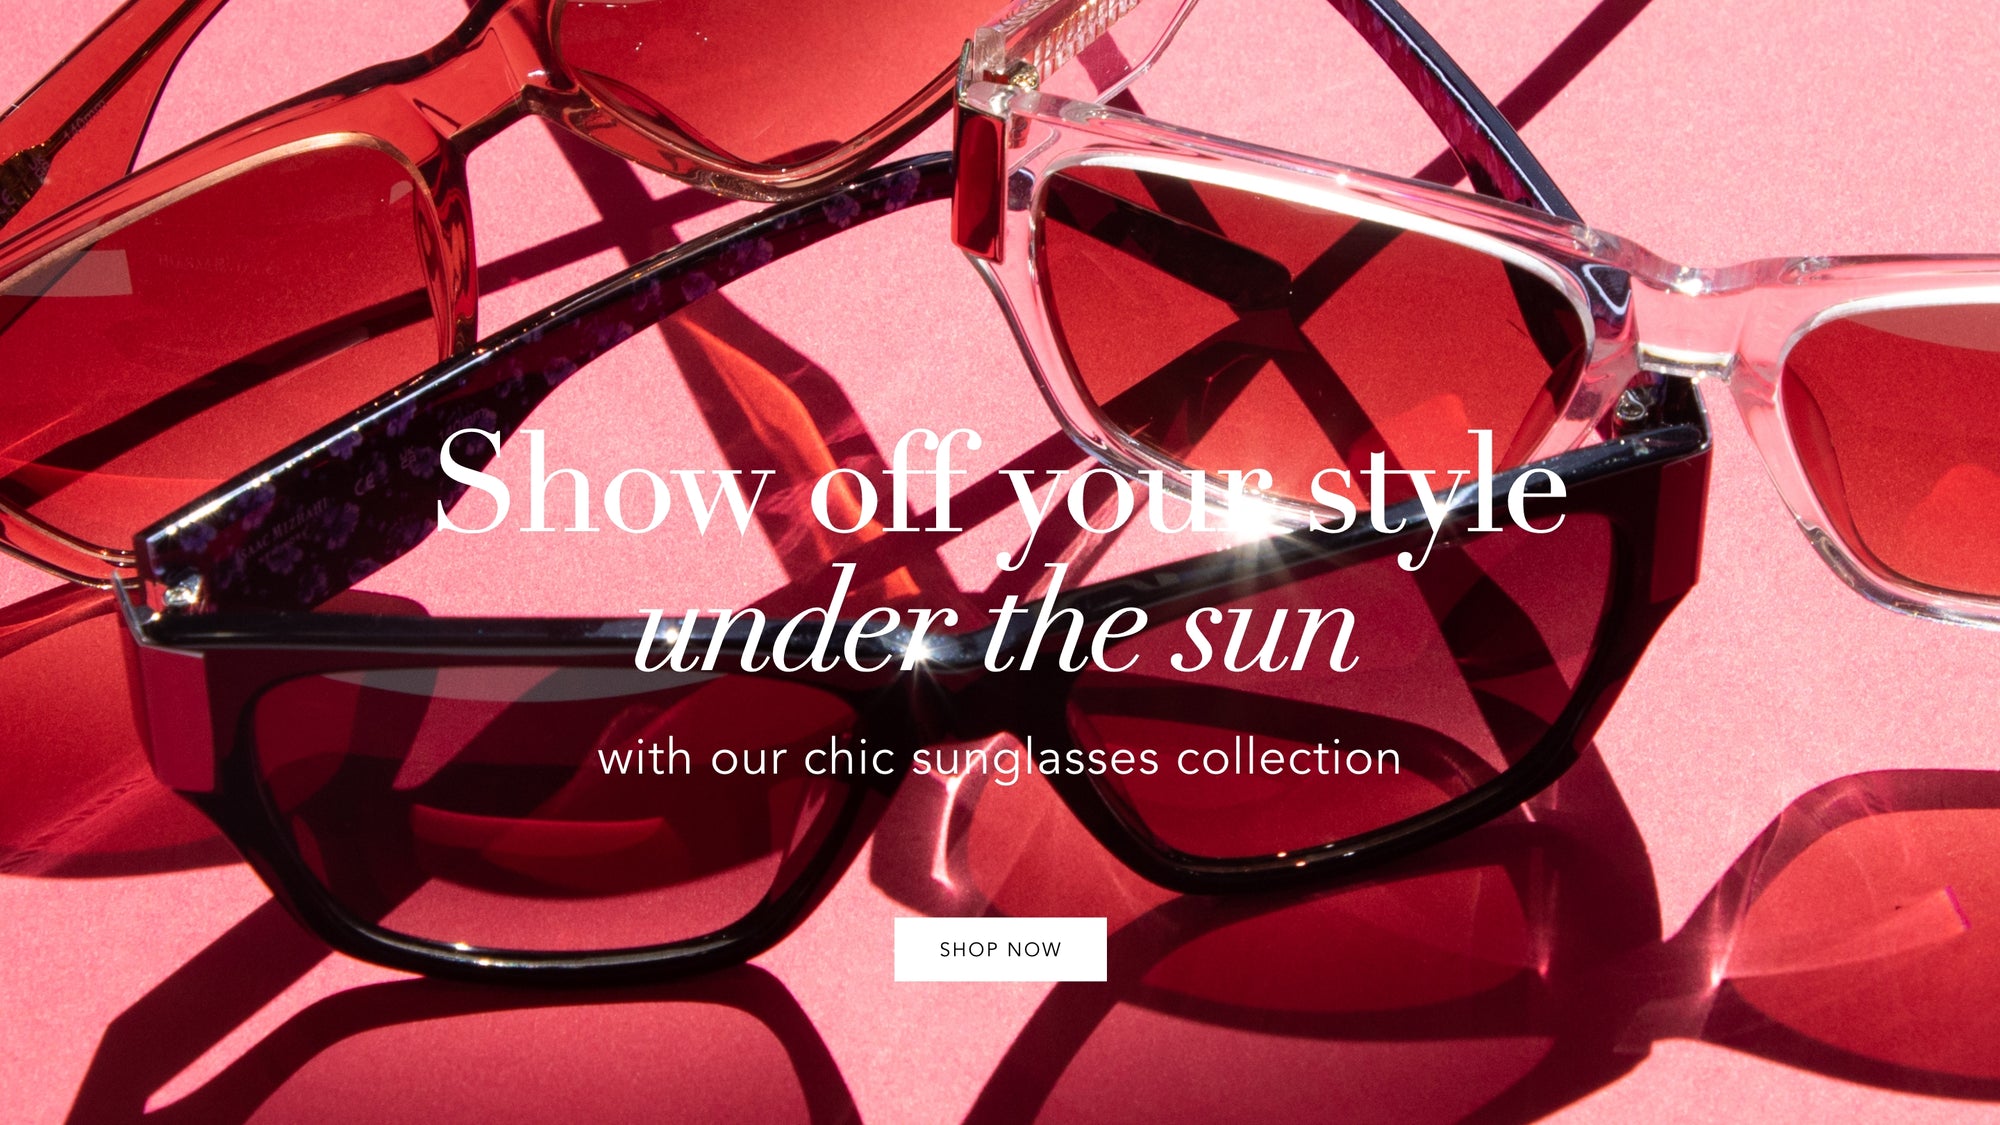 show off your style under the sun with out chic sunglasses collection, shop now. image of isaac mizrahi sungalsses